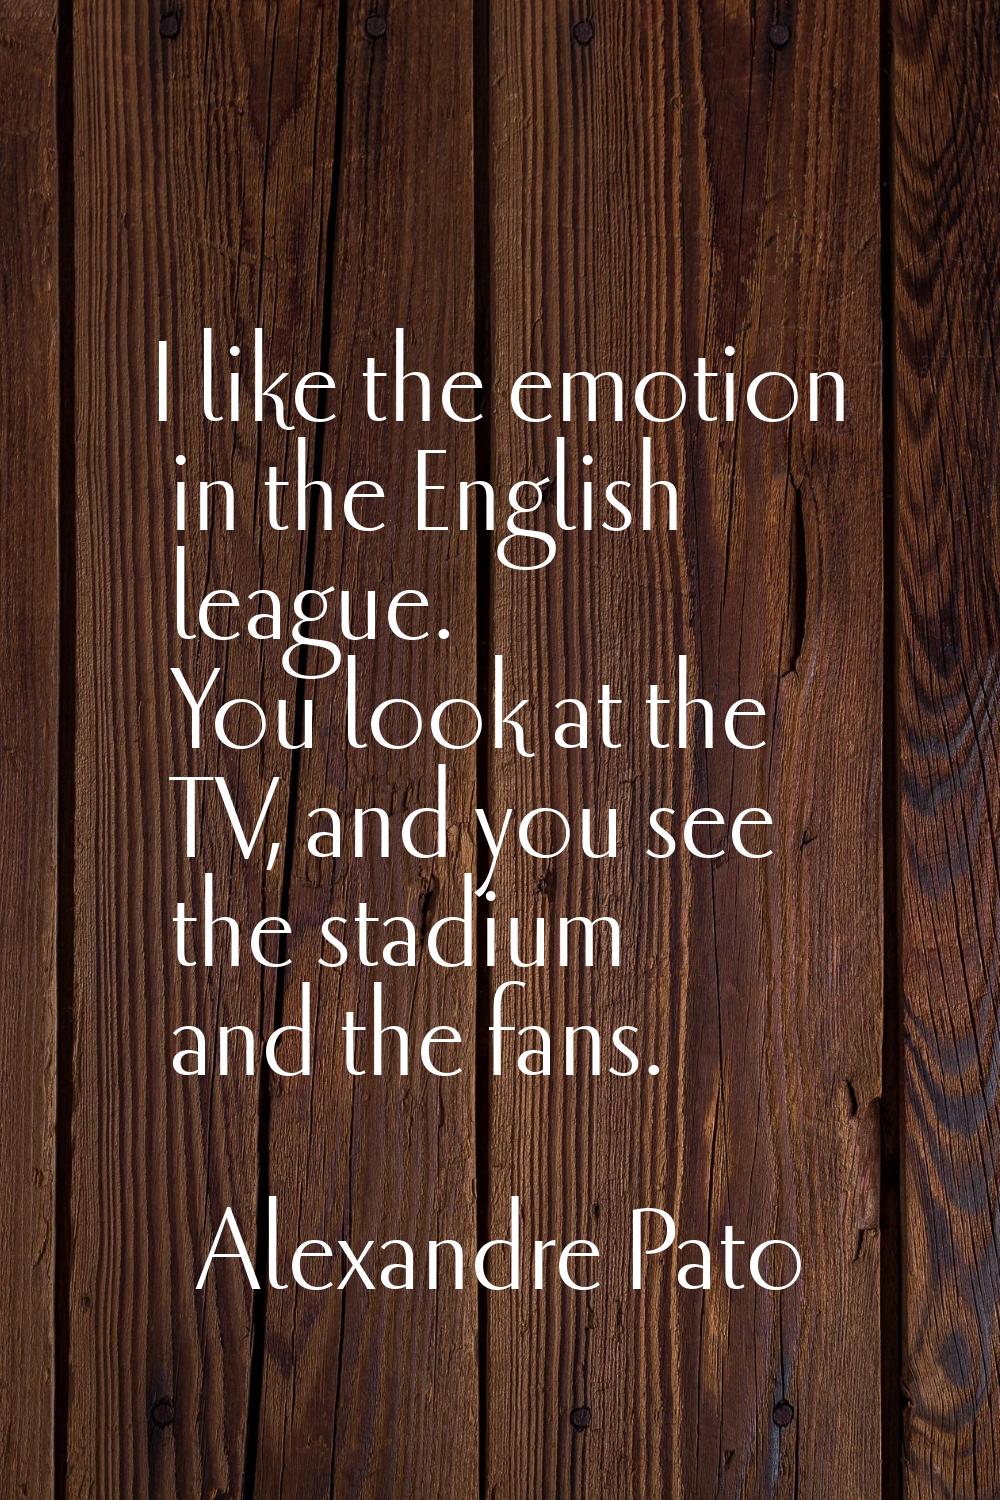 I like the emotion in the English league. You look at the TV, and you see the stadium and the fans.